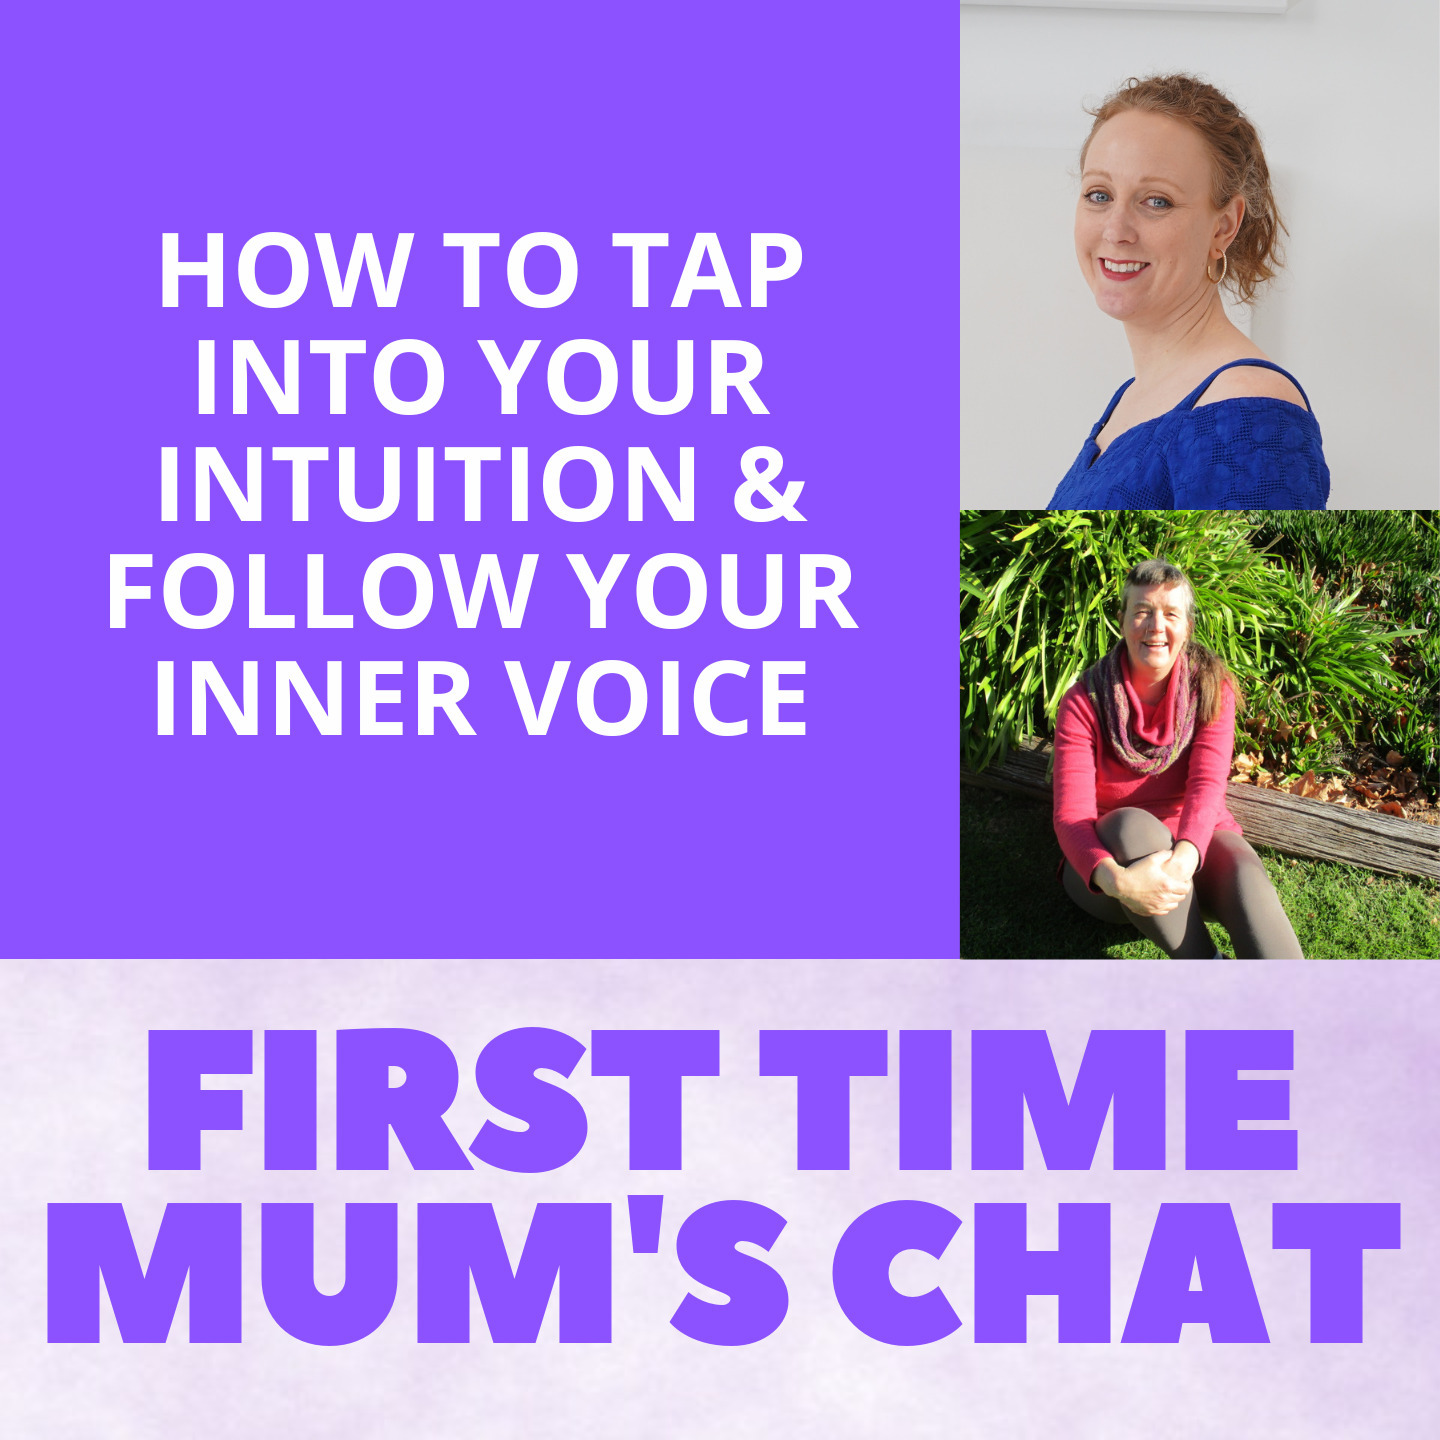 How To Tap Into Your Intuition and Follow Your Inner Voice